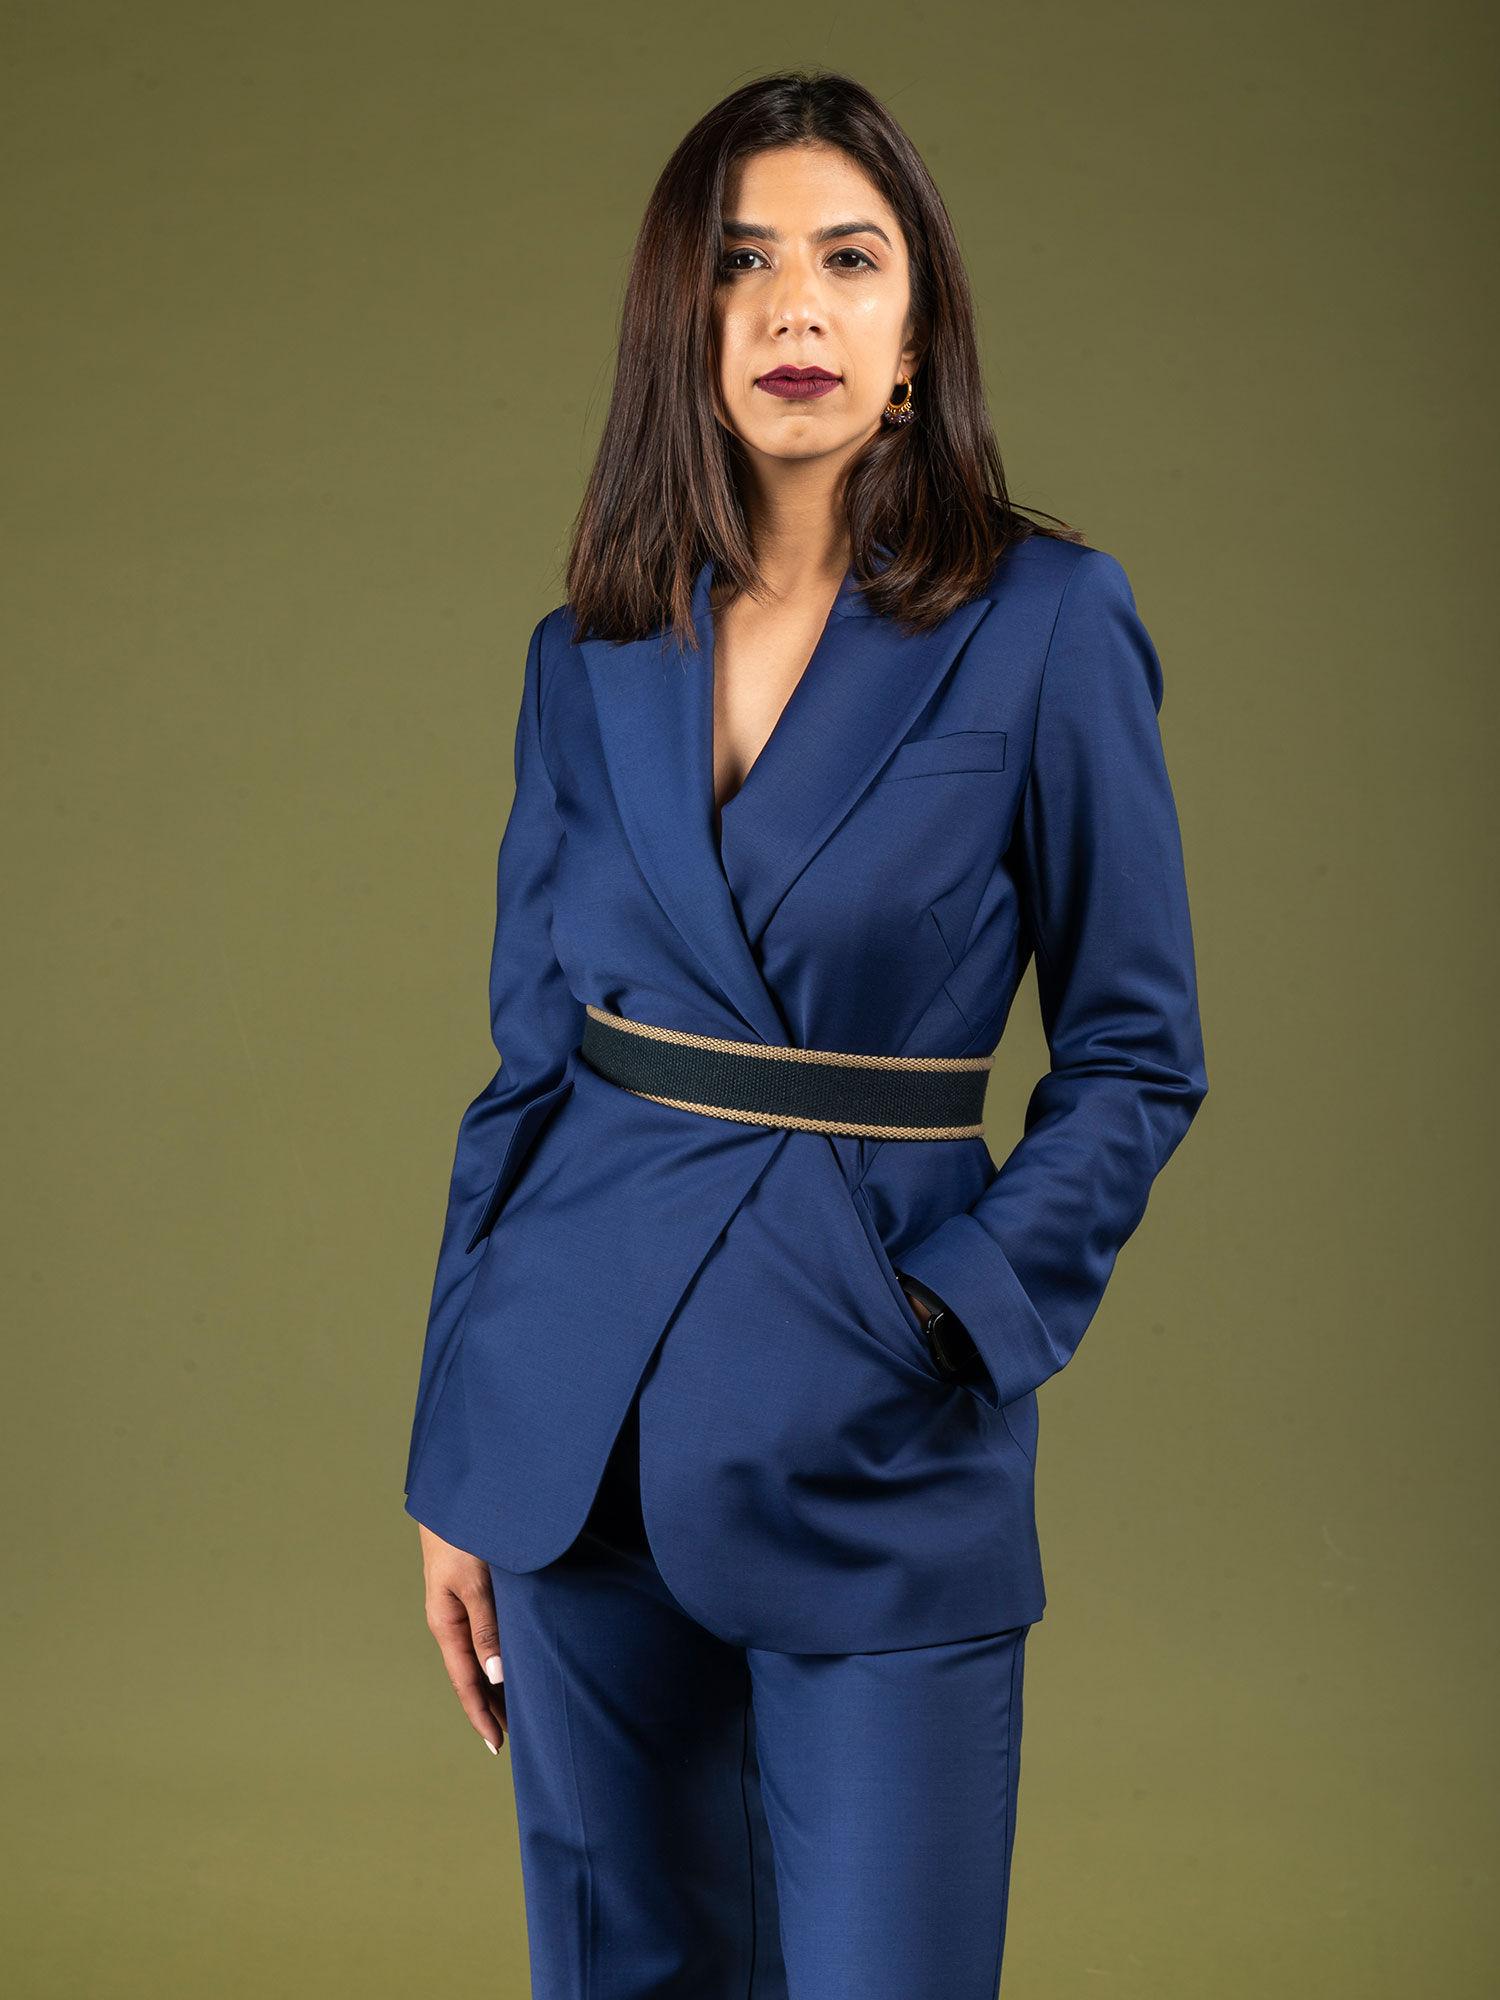 royal blue solid stretch wool tailored blazer